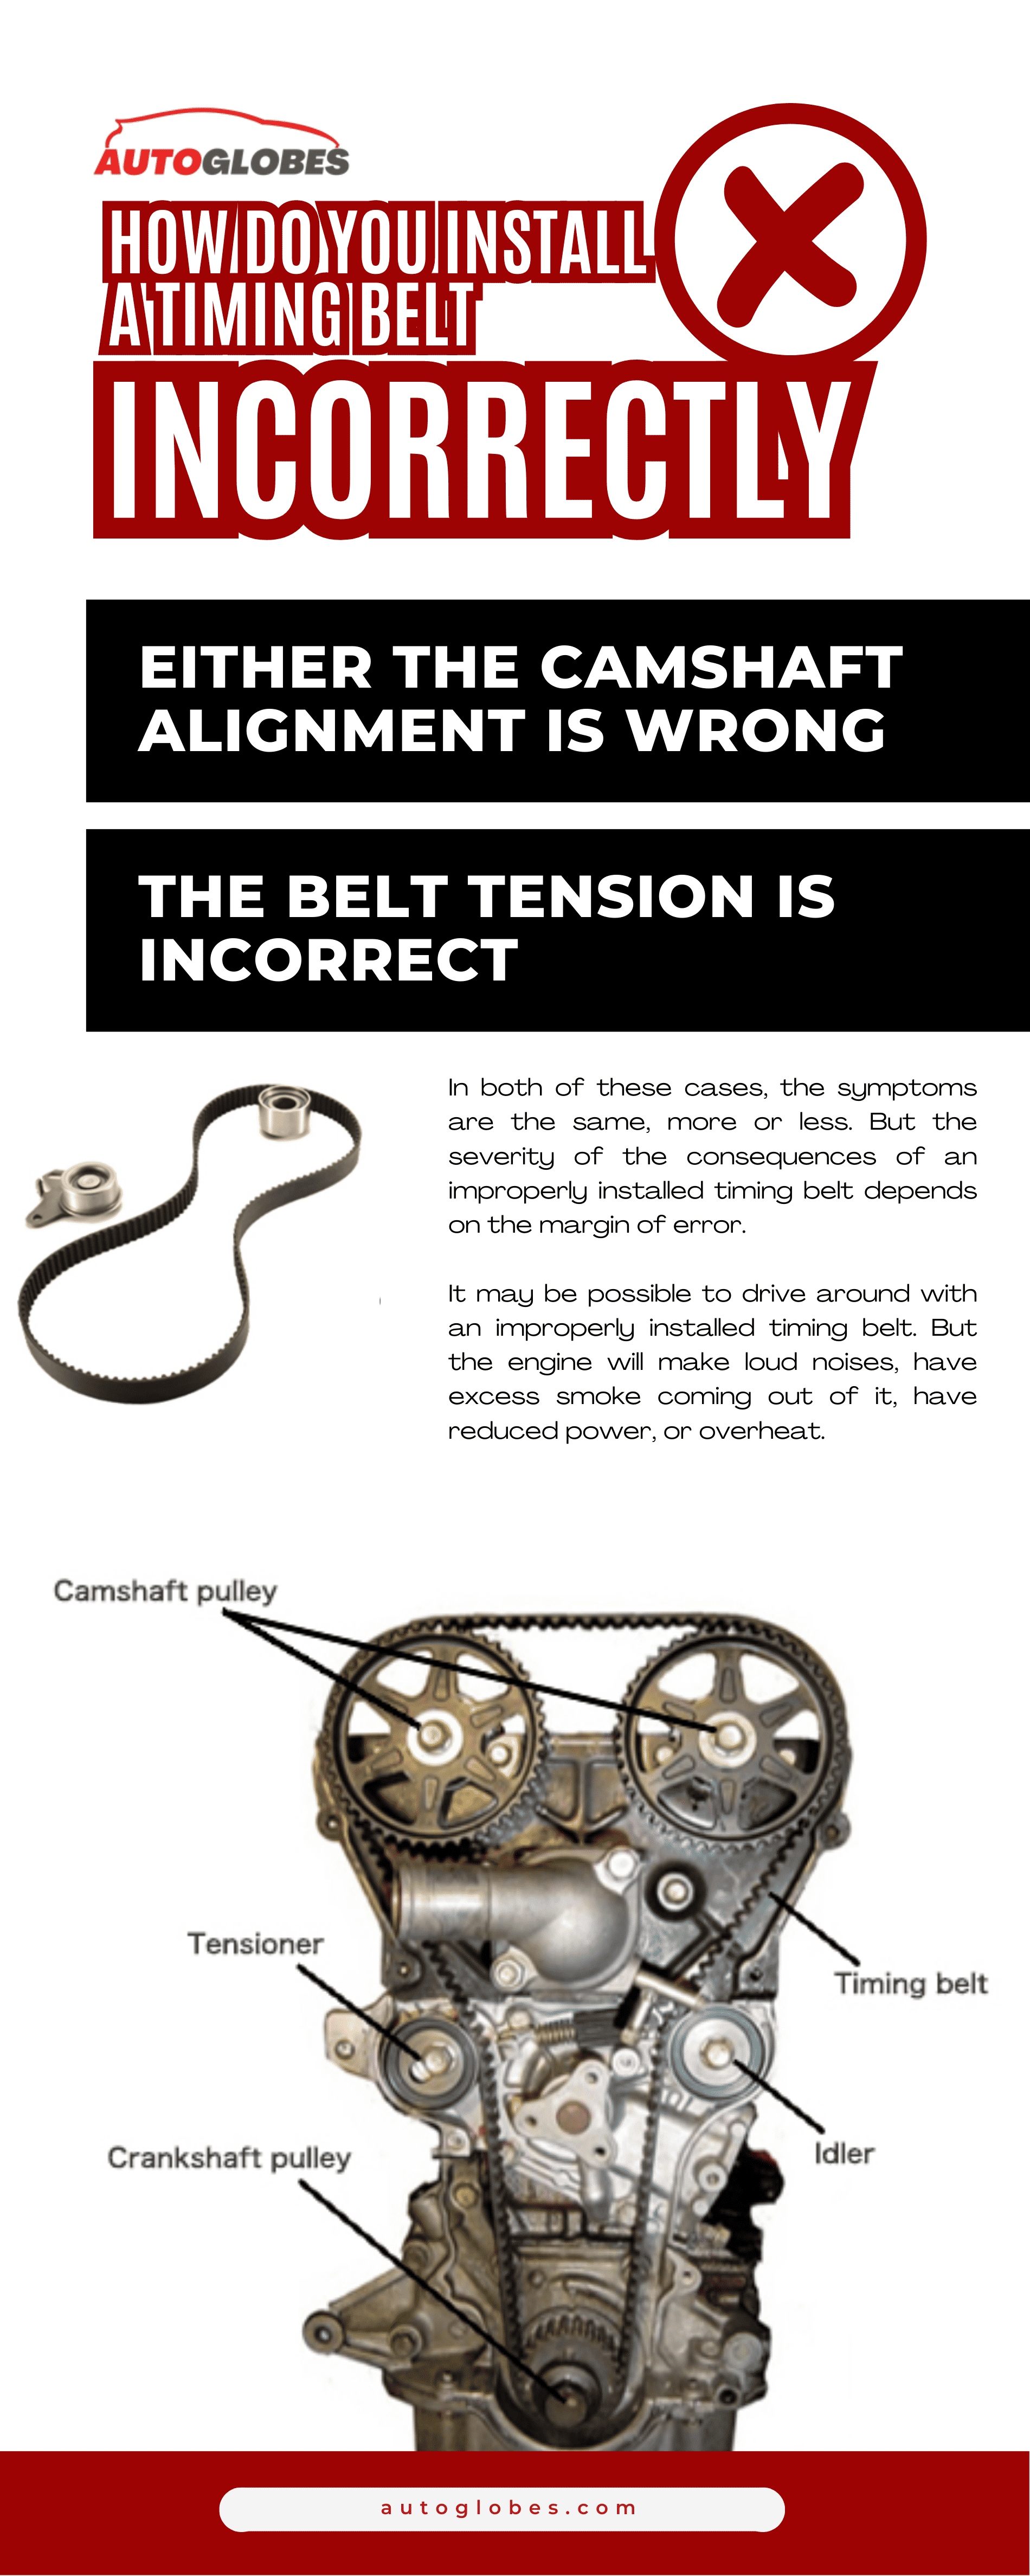 How Do You Install a Timing Belt Incorrectly Infographic